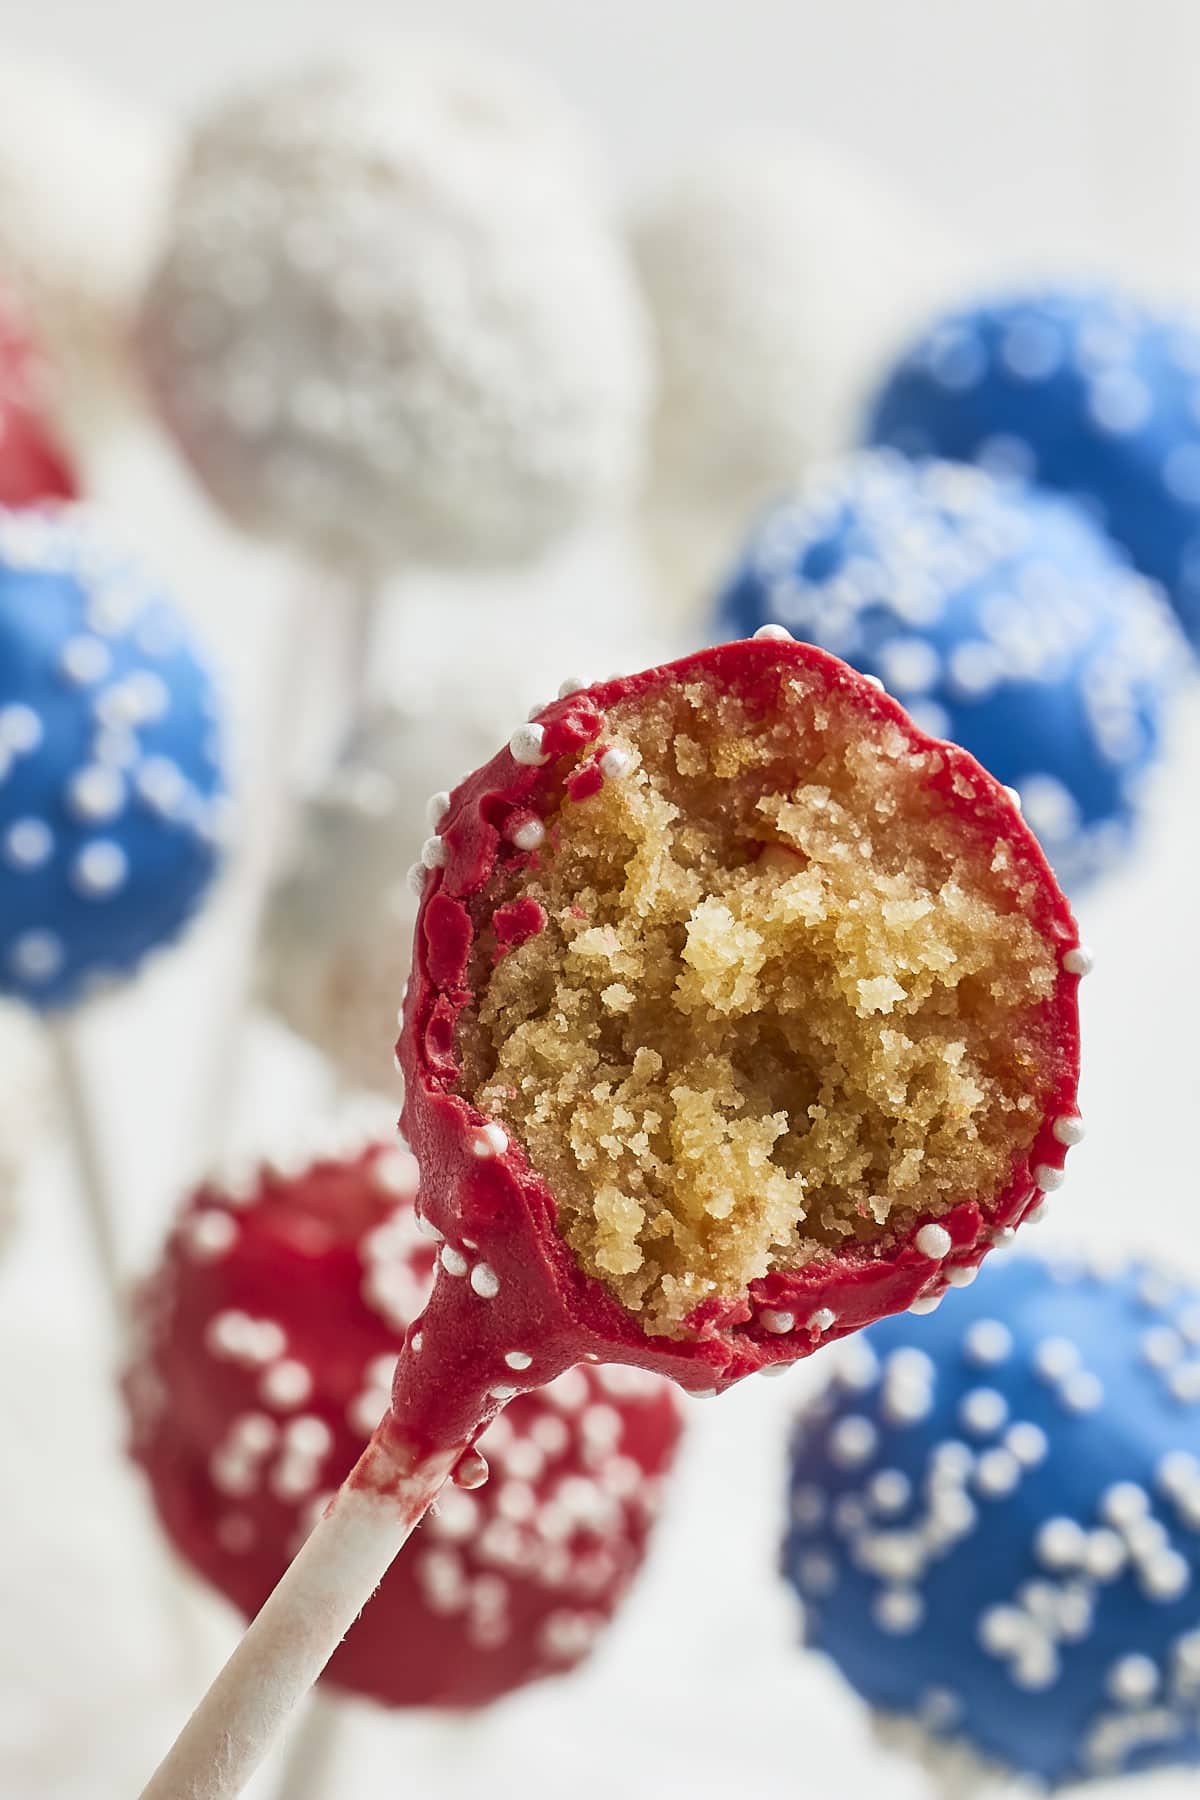 Red, white, and blue Cake Pops! Perfect for patriotic holidays.